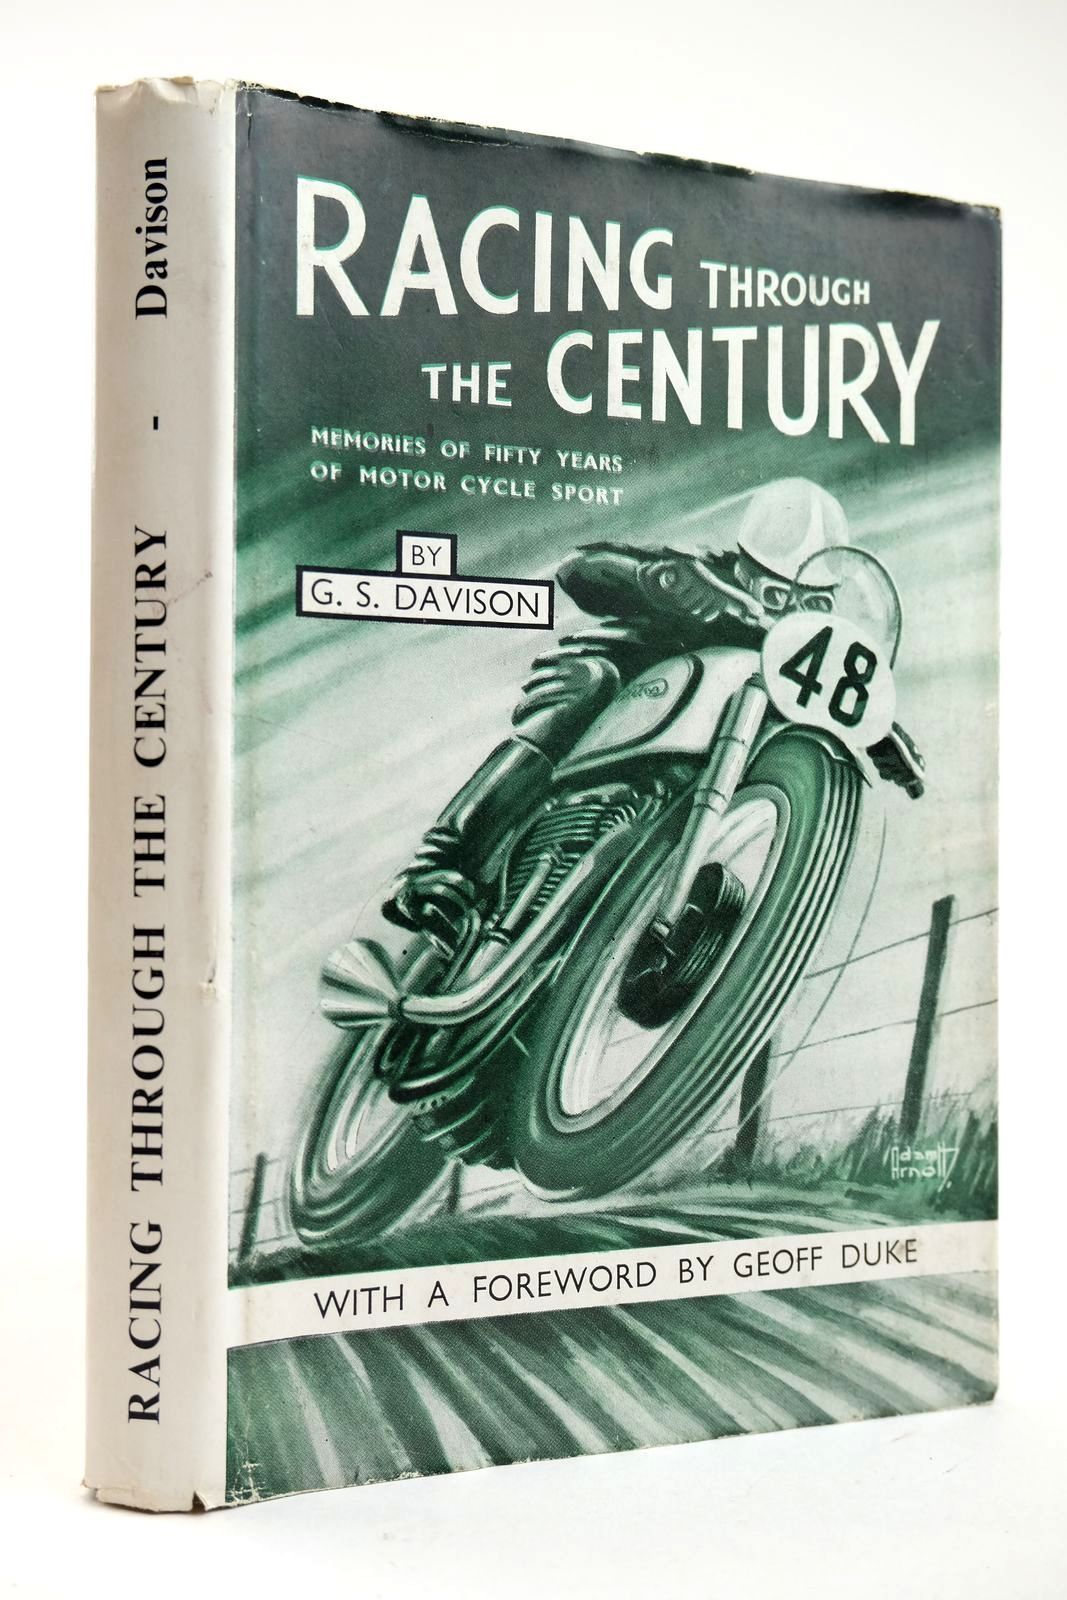 Photo of RACING THROUGH THE CENTURY written by Davison, G.S. Duke, Geoff published by The T.T. Special (STOCK CODE: 2132282)  for sale by Stella & Rose's Books